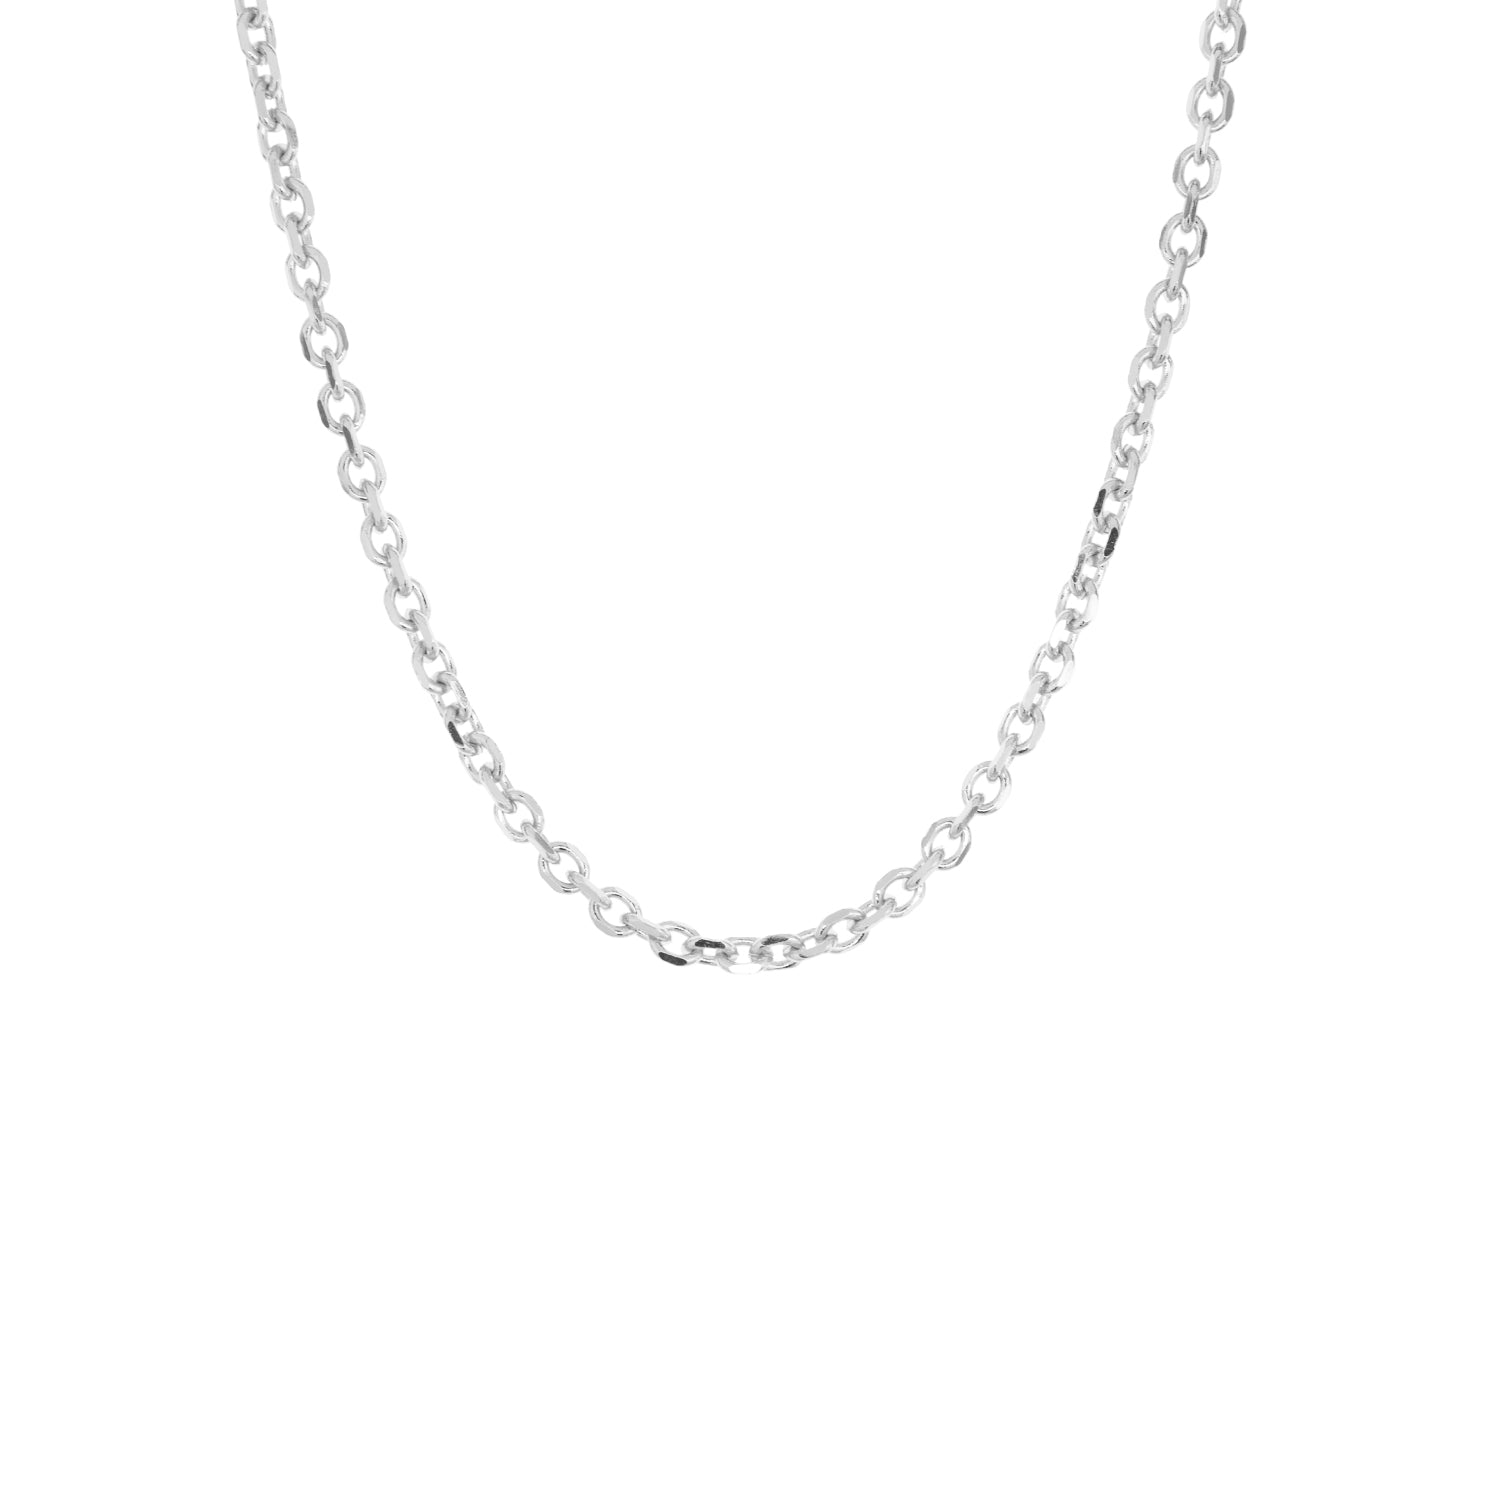 20" cable chain necklace